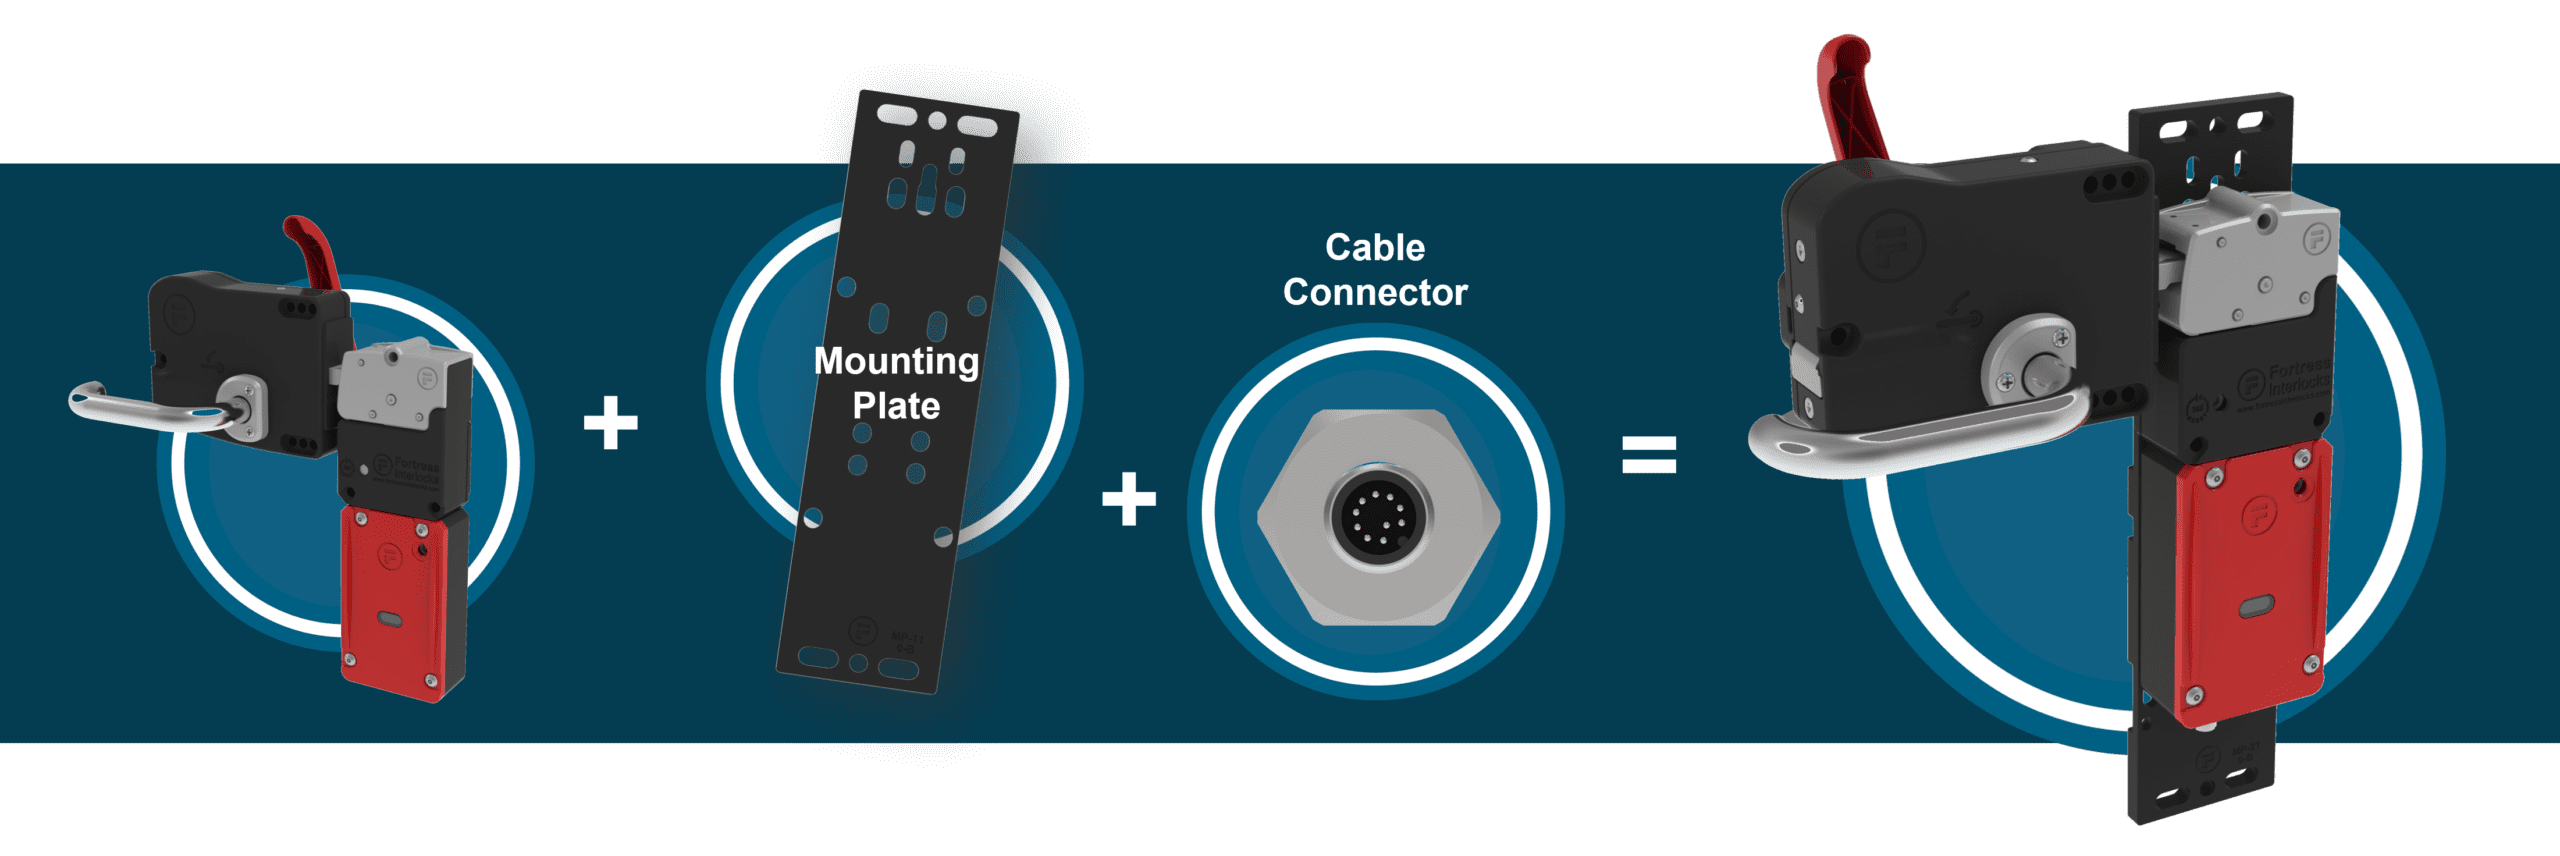 interlock accessories for easy installation - mounting plate and quick disconnect